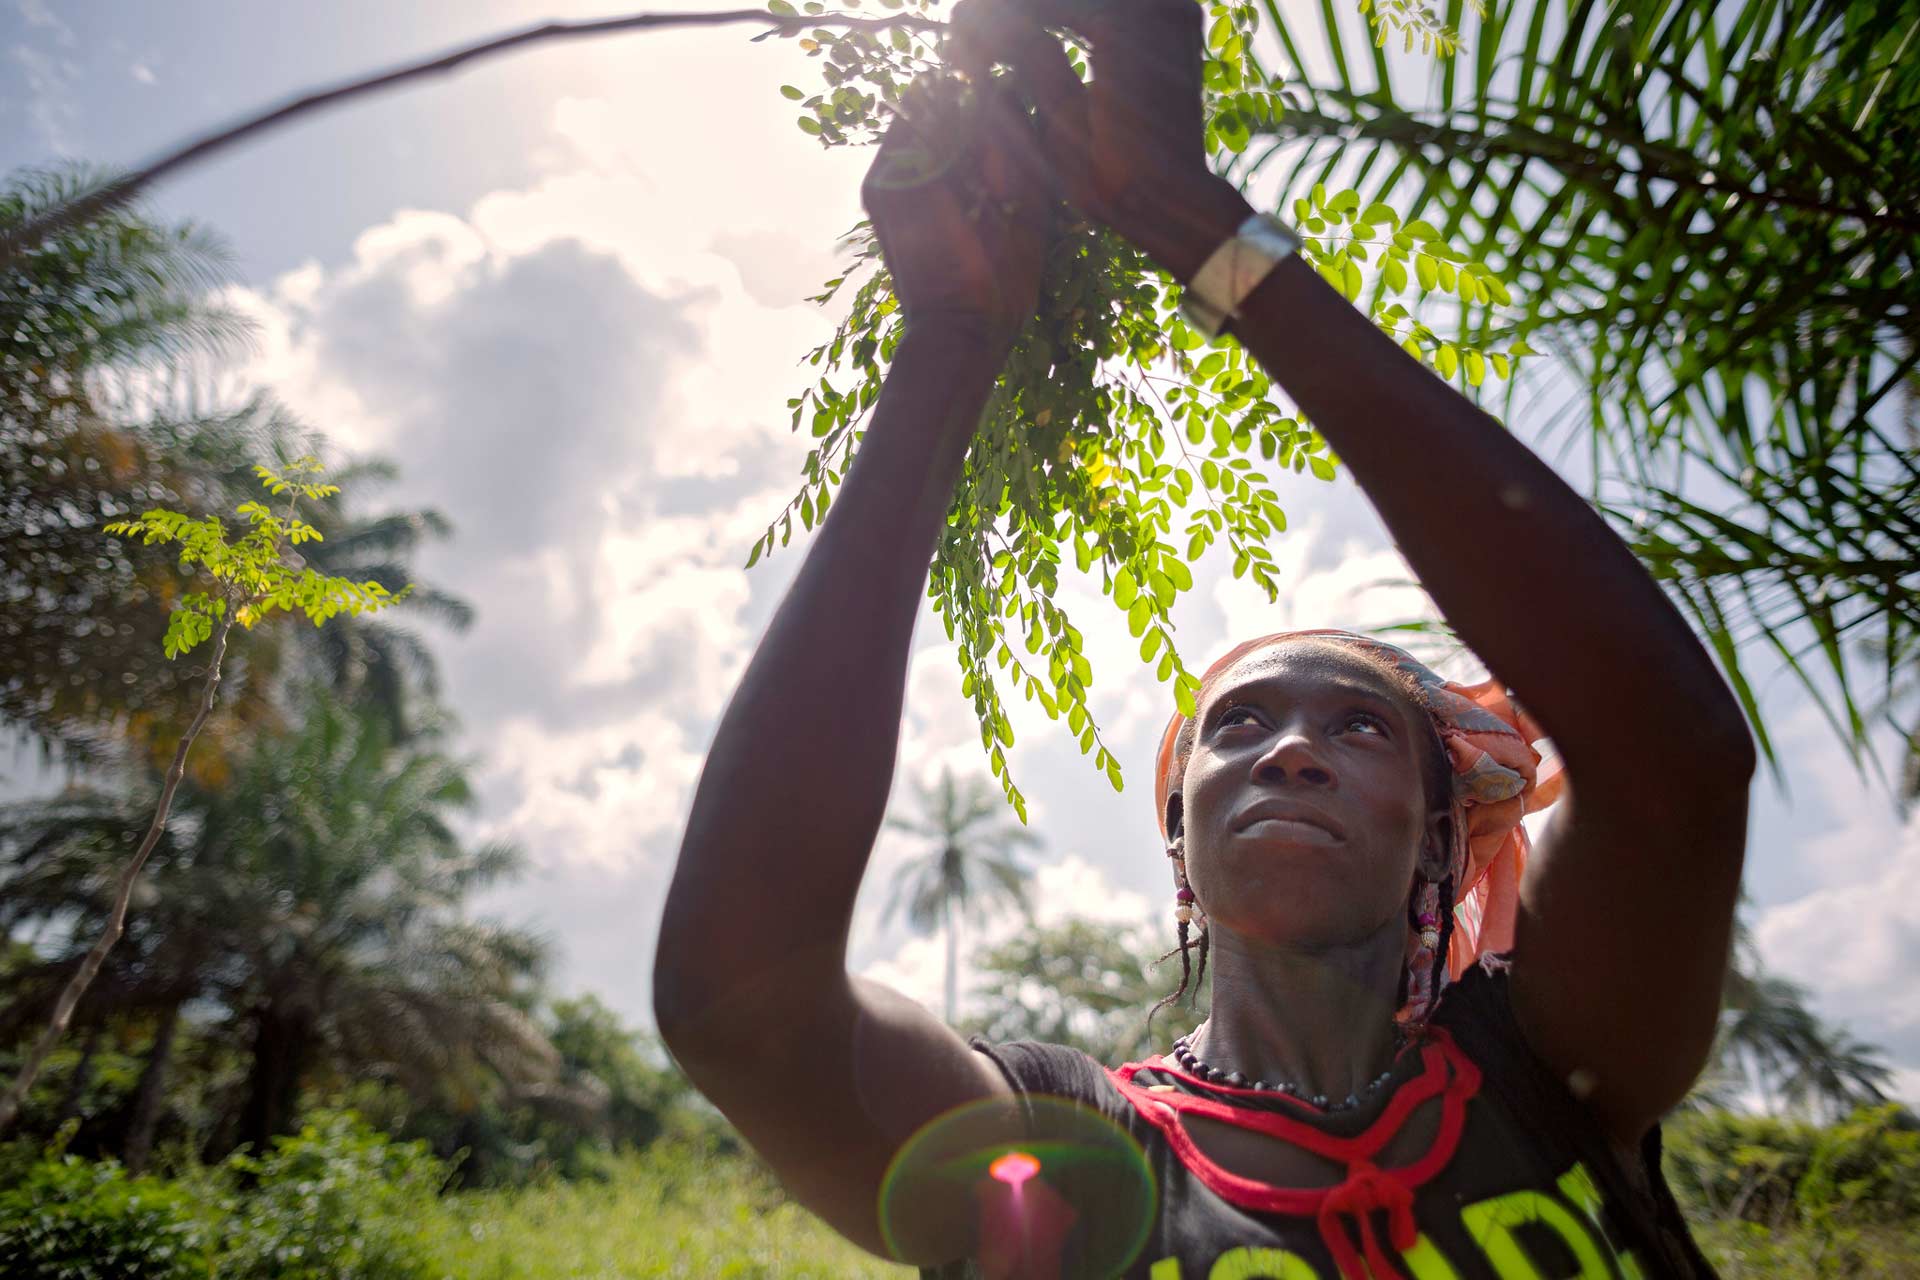 In Guinea, rural women form cooperatives where members learn how to plant a vitamin-rich tree called Moringa and how to clean, dry and sell its leaves.